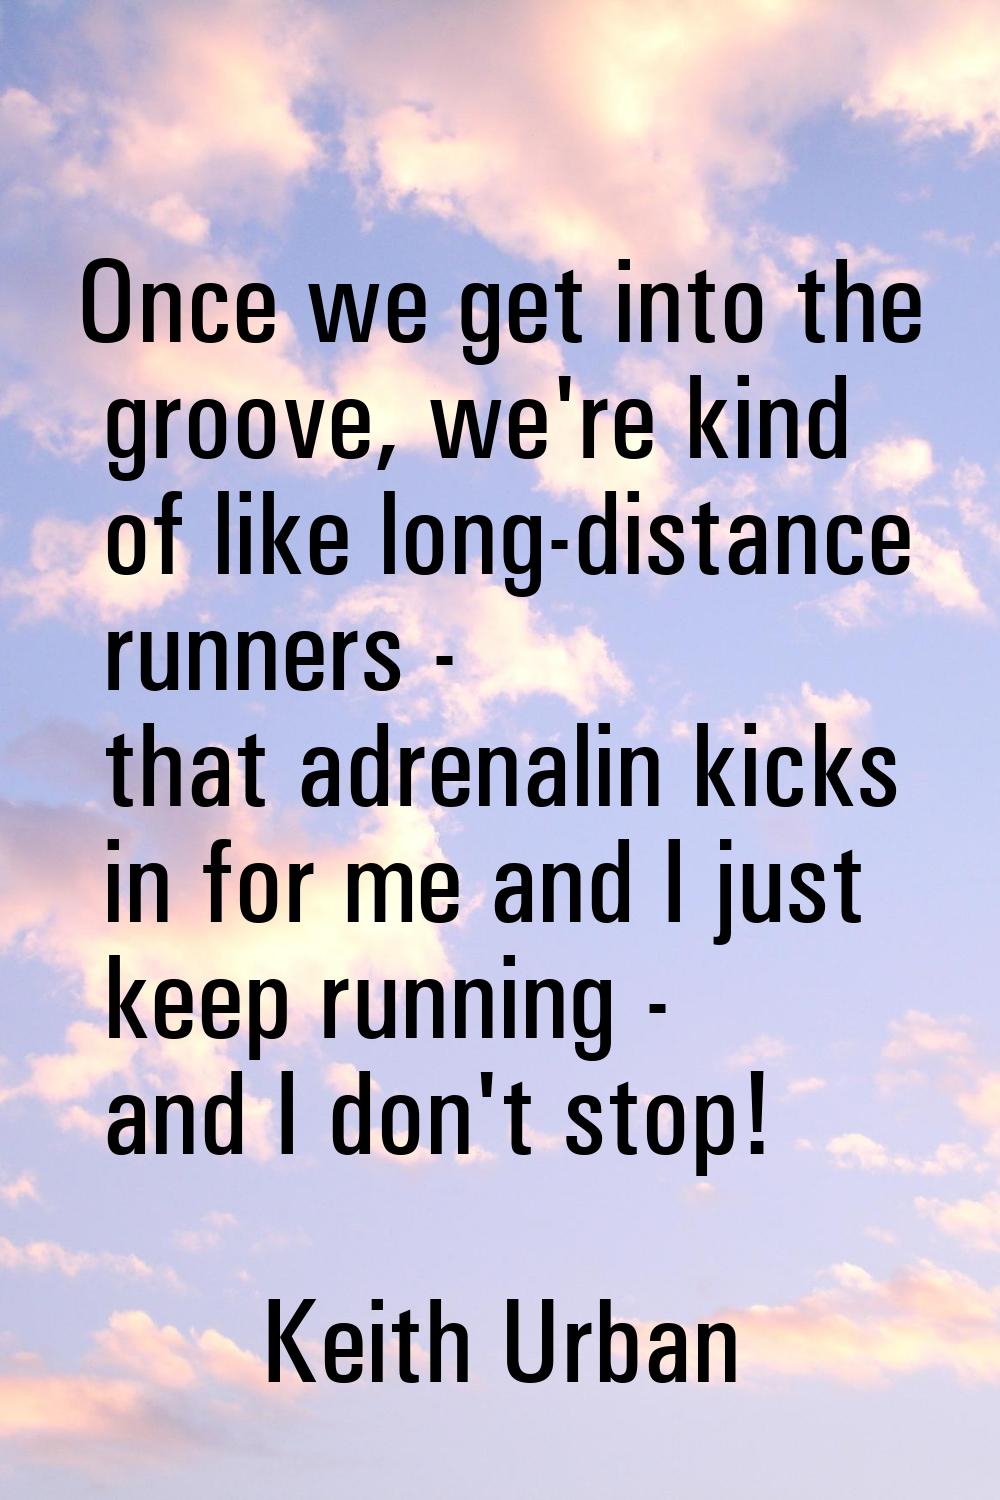 Once we get into the groove, we're kind of like long-distance runners - that adrenalin kicks in for